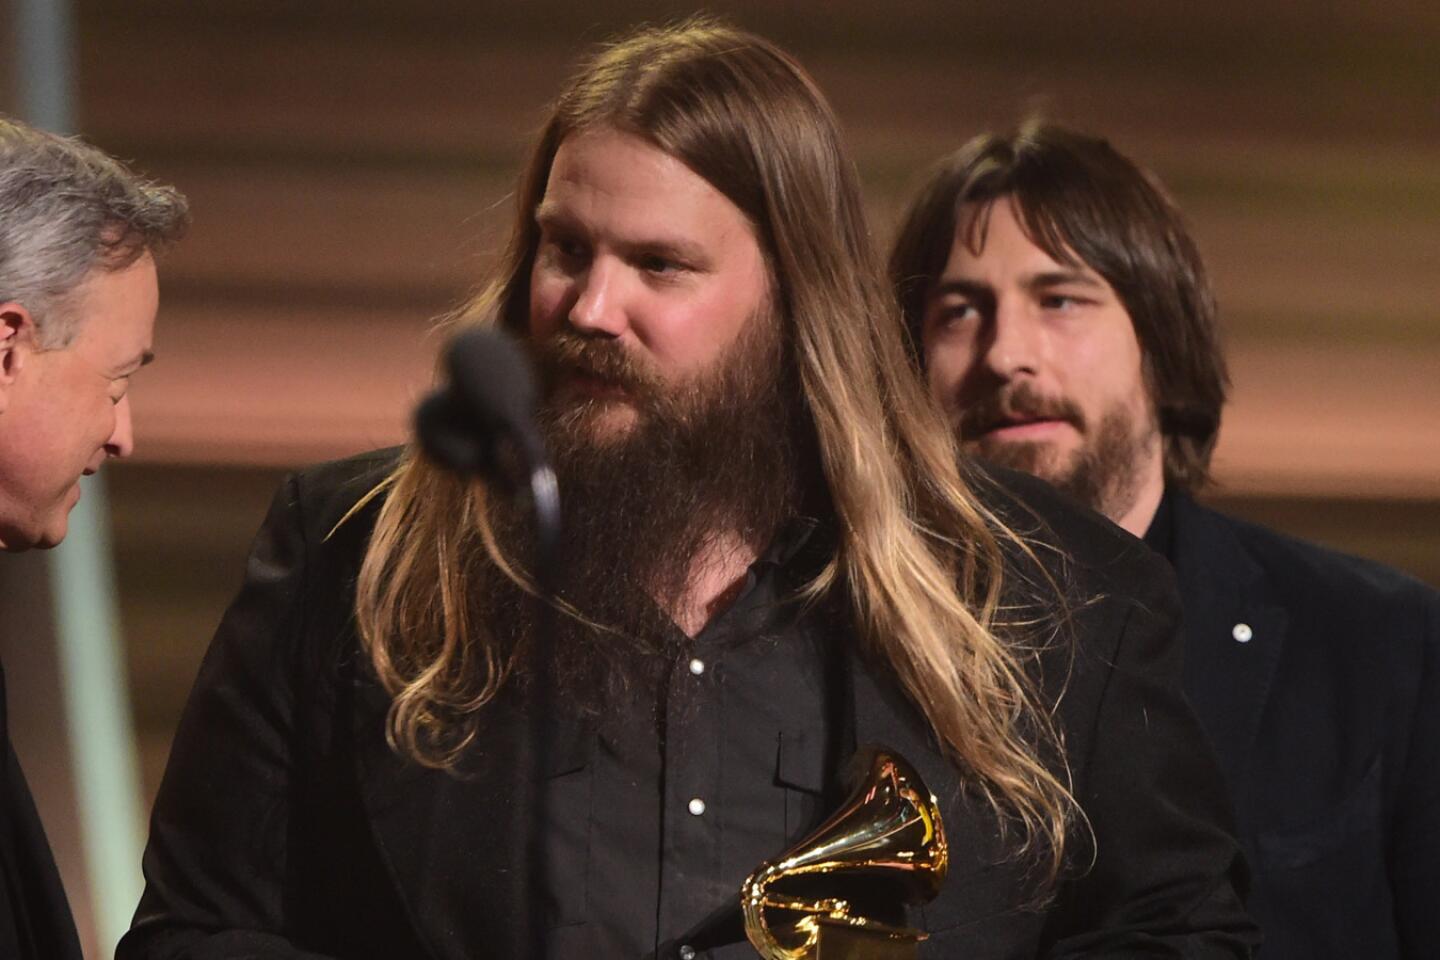 Chris Stapleton receives the Grammy country album for "Traveller" onstage.